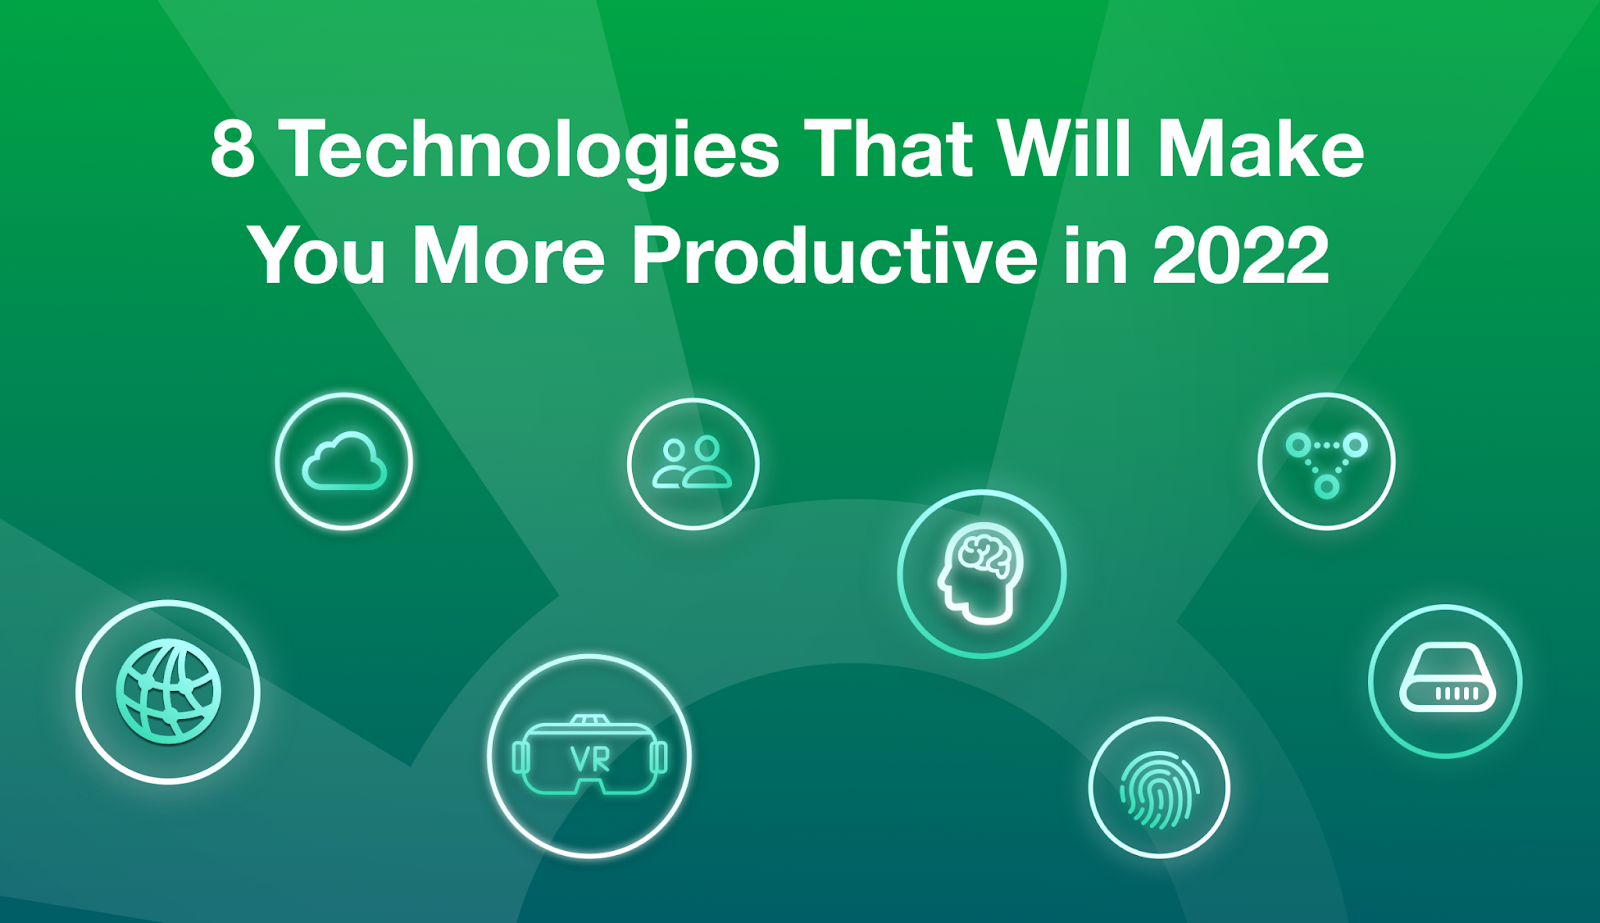 Green background. Title at the top centre reads "8 Technologies That Will Make You More Productive in 2022". Under the title, 8 white neon icons side by side referring to the 8 technologies: a globe, a cloud, a pair of VR glasses, two people, a brain, a fingerprint, a triangle connected by dots, and a modem device. 